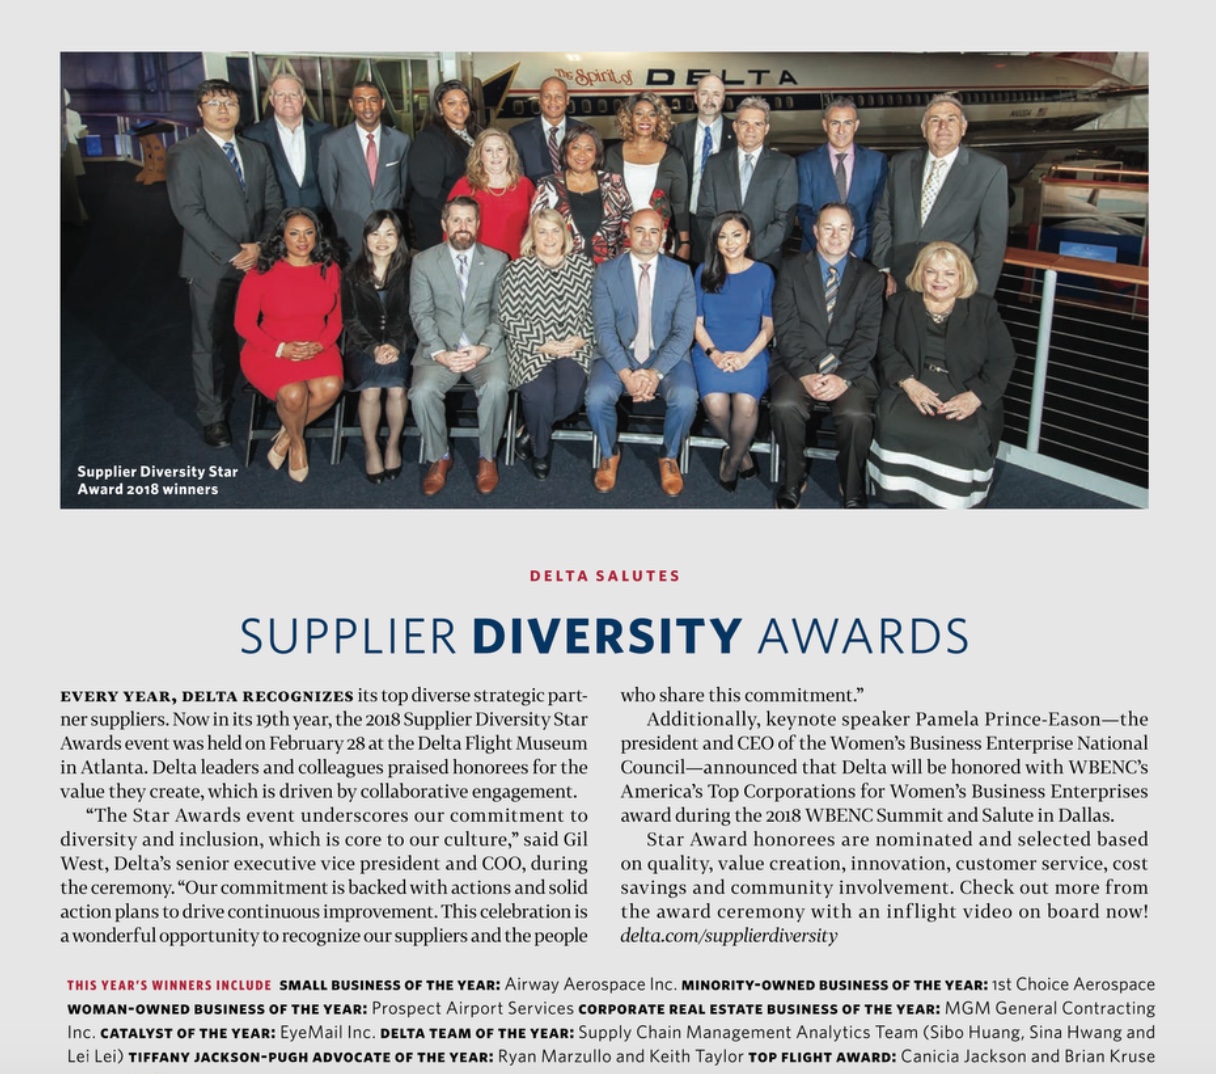 Prospect And Star Award Honorees Recognized In Sky Magazine